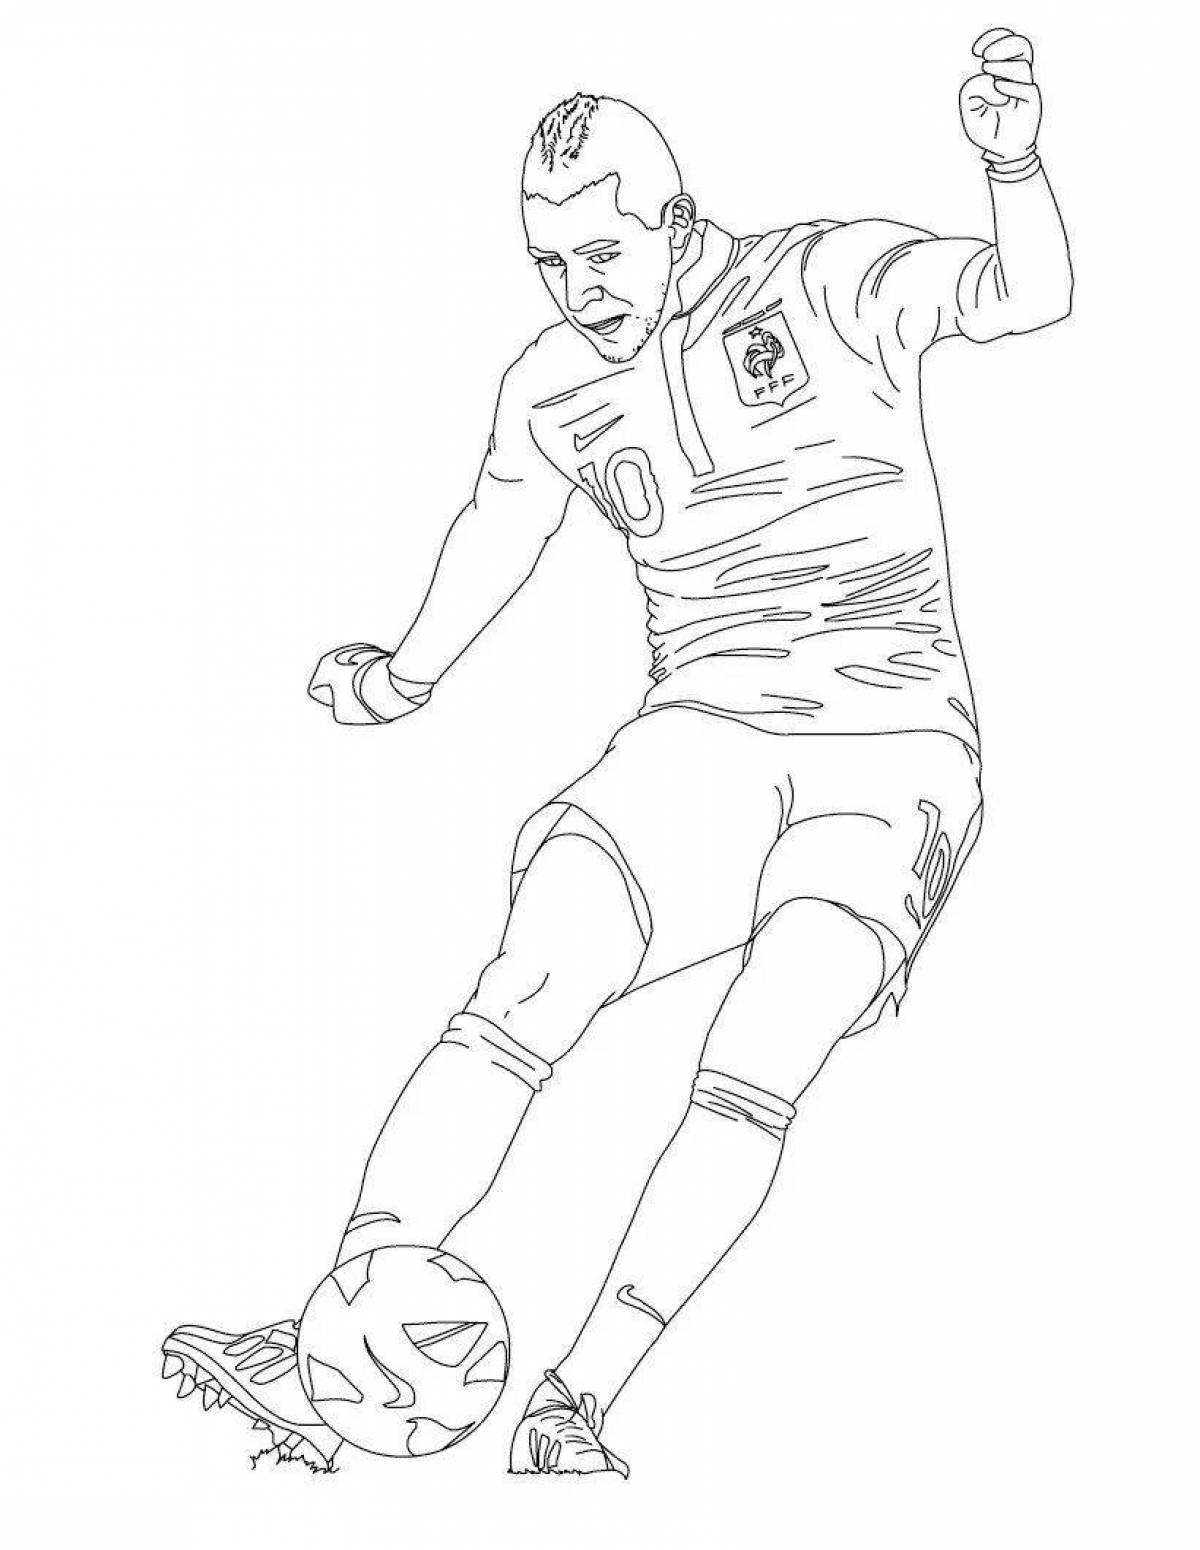 Coloring page funny football players